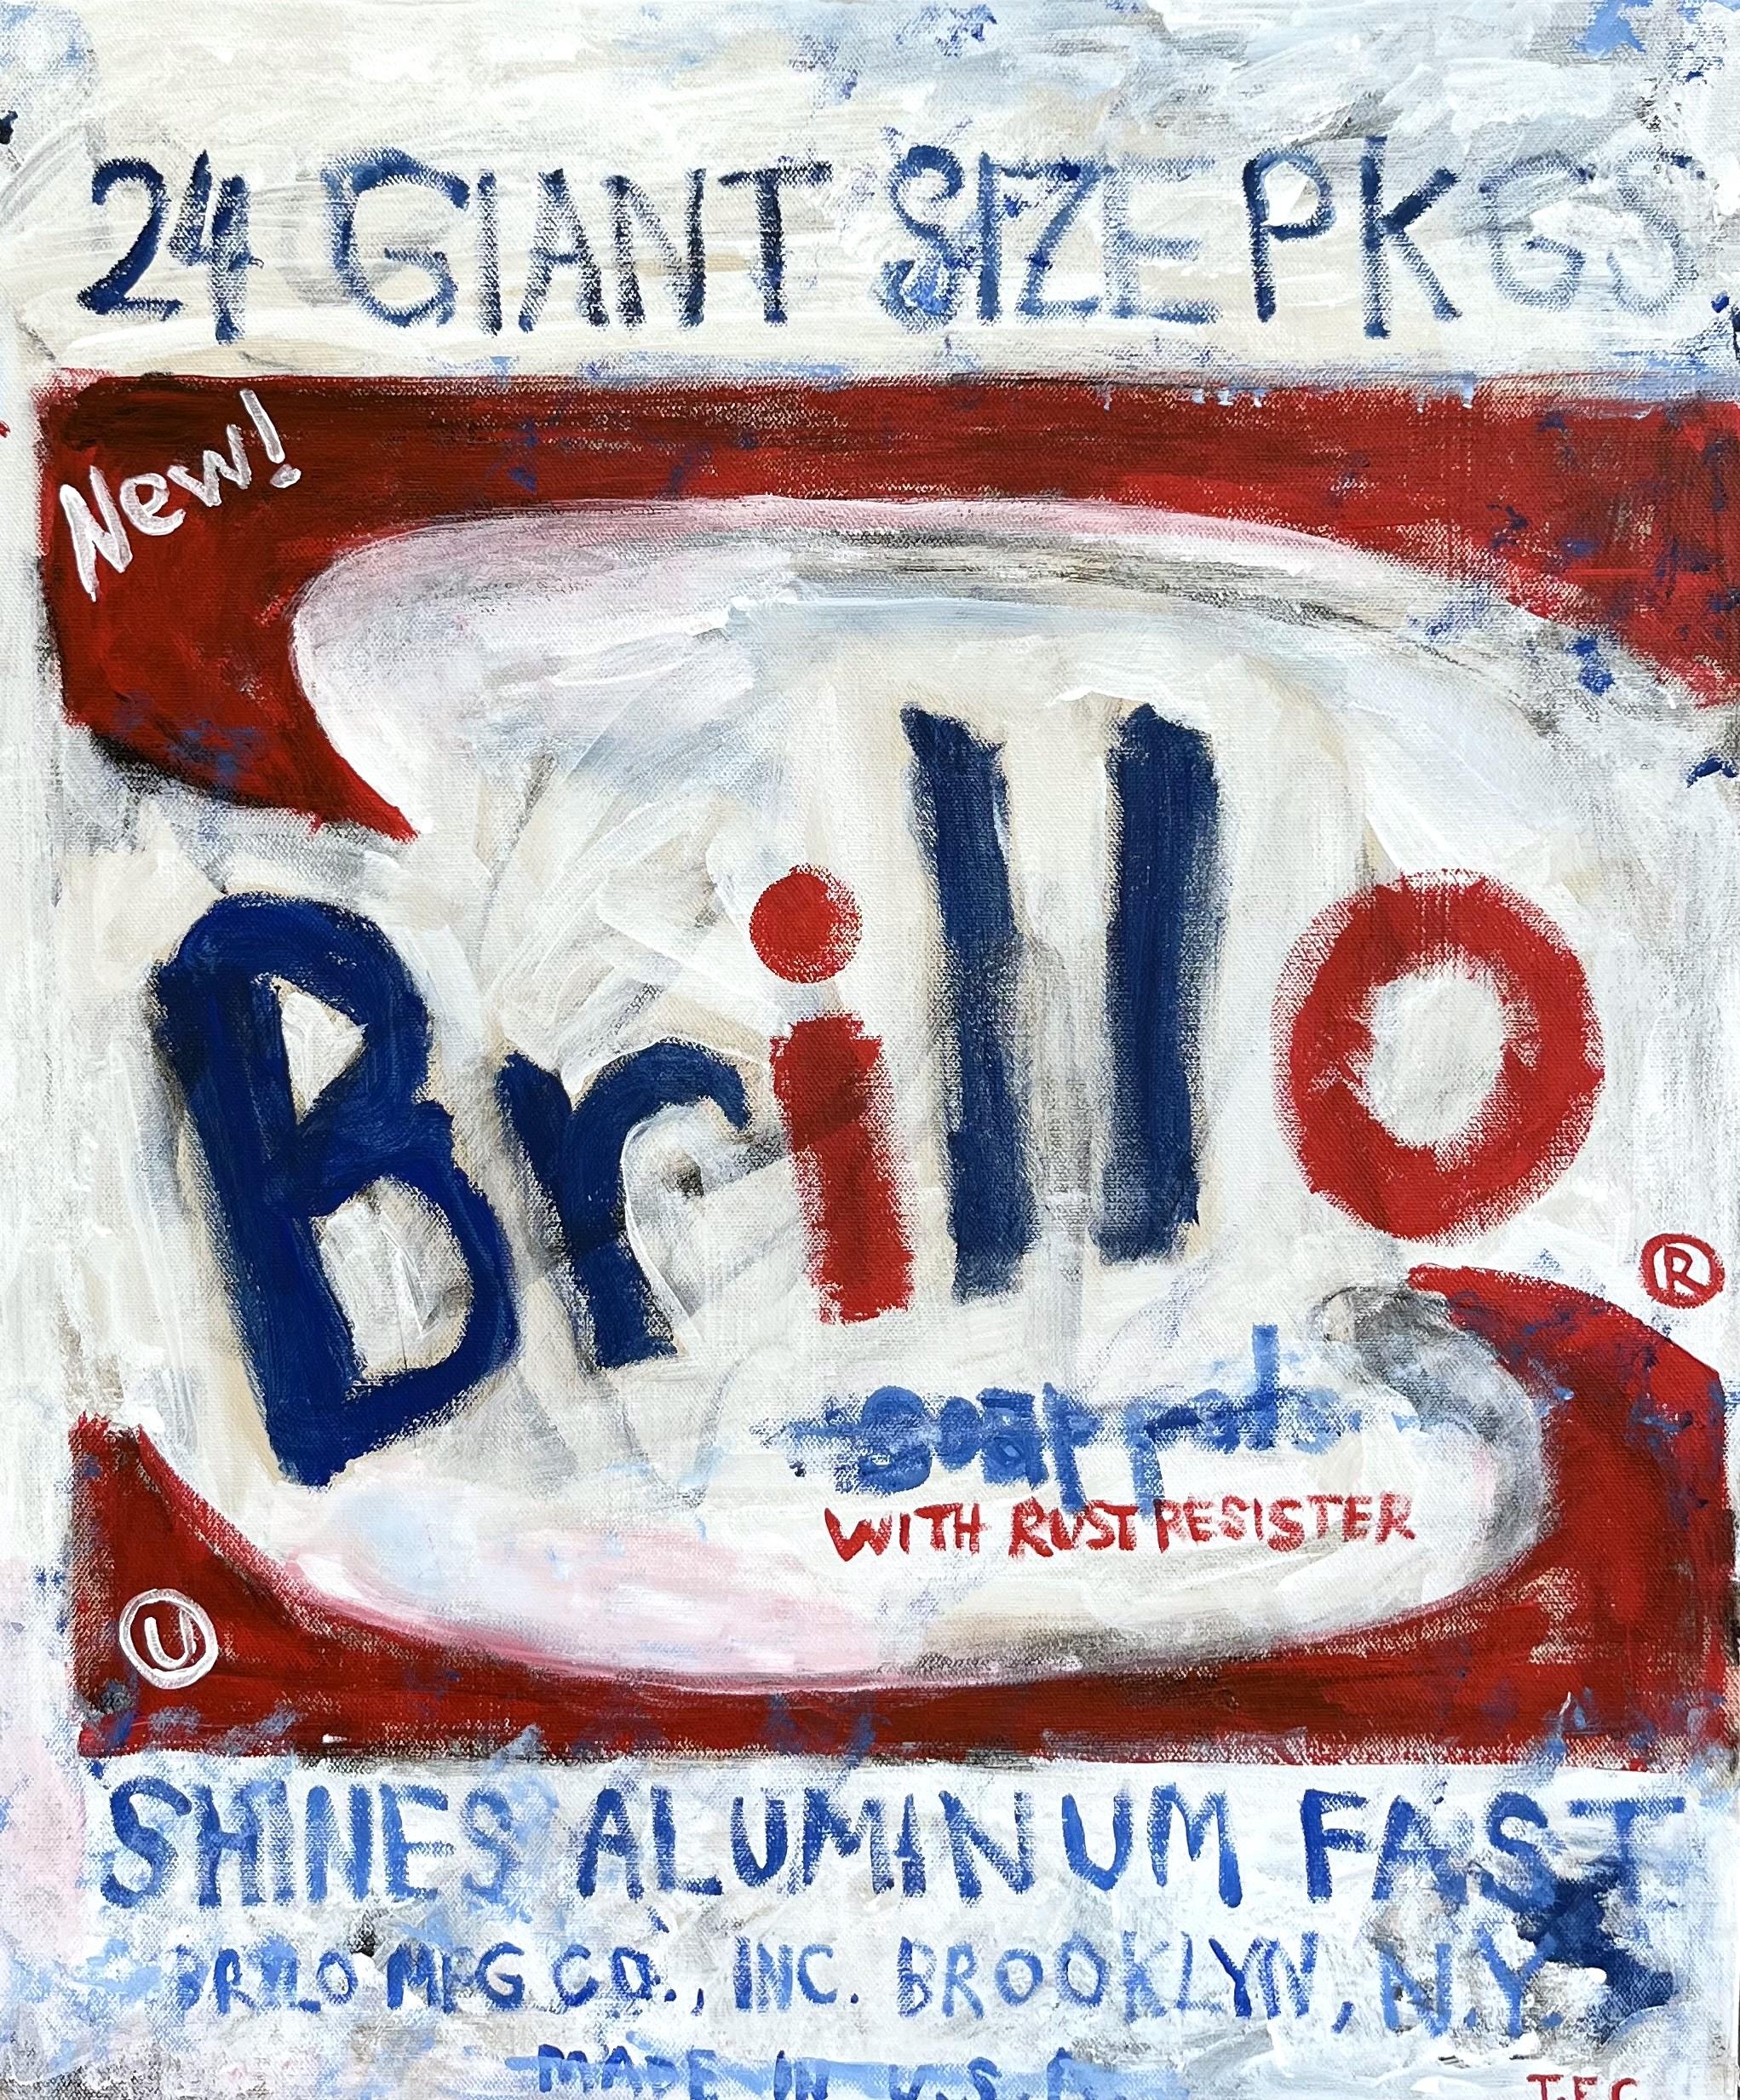 Tyler Casey Abstract Painting - "Brillo" Contemporary Abstract Andy Warhol Inspired Pop Art Painting